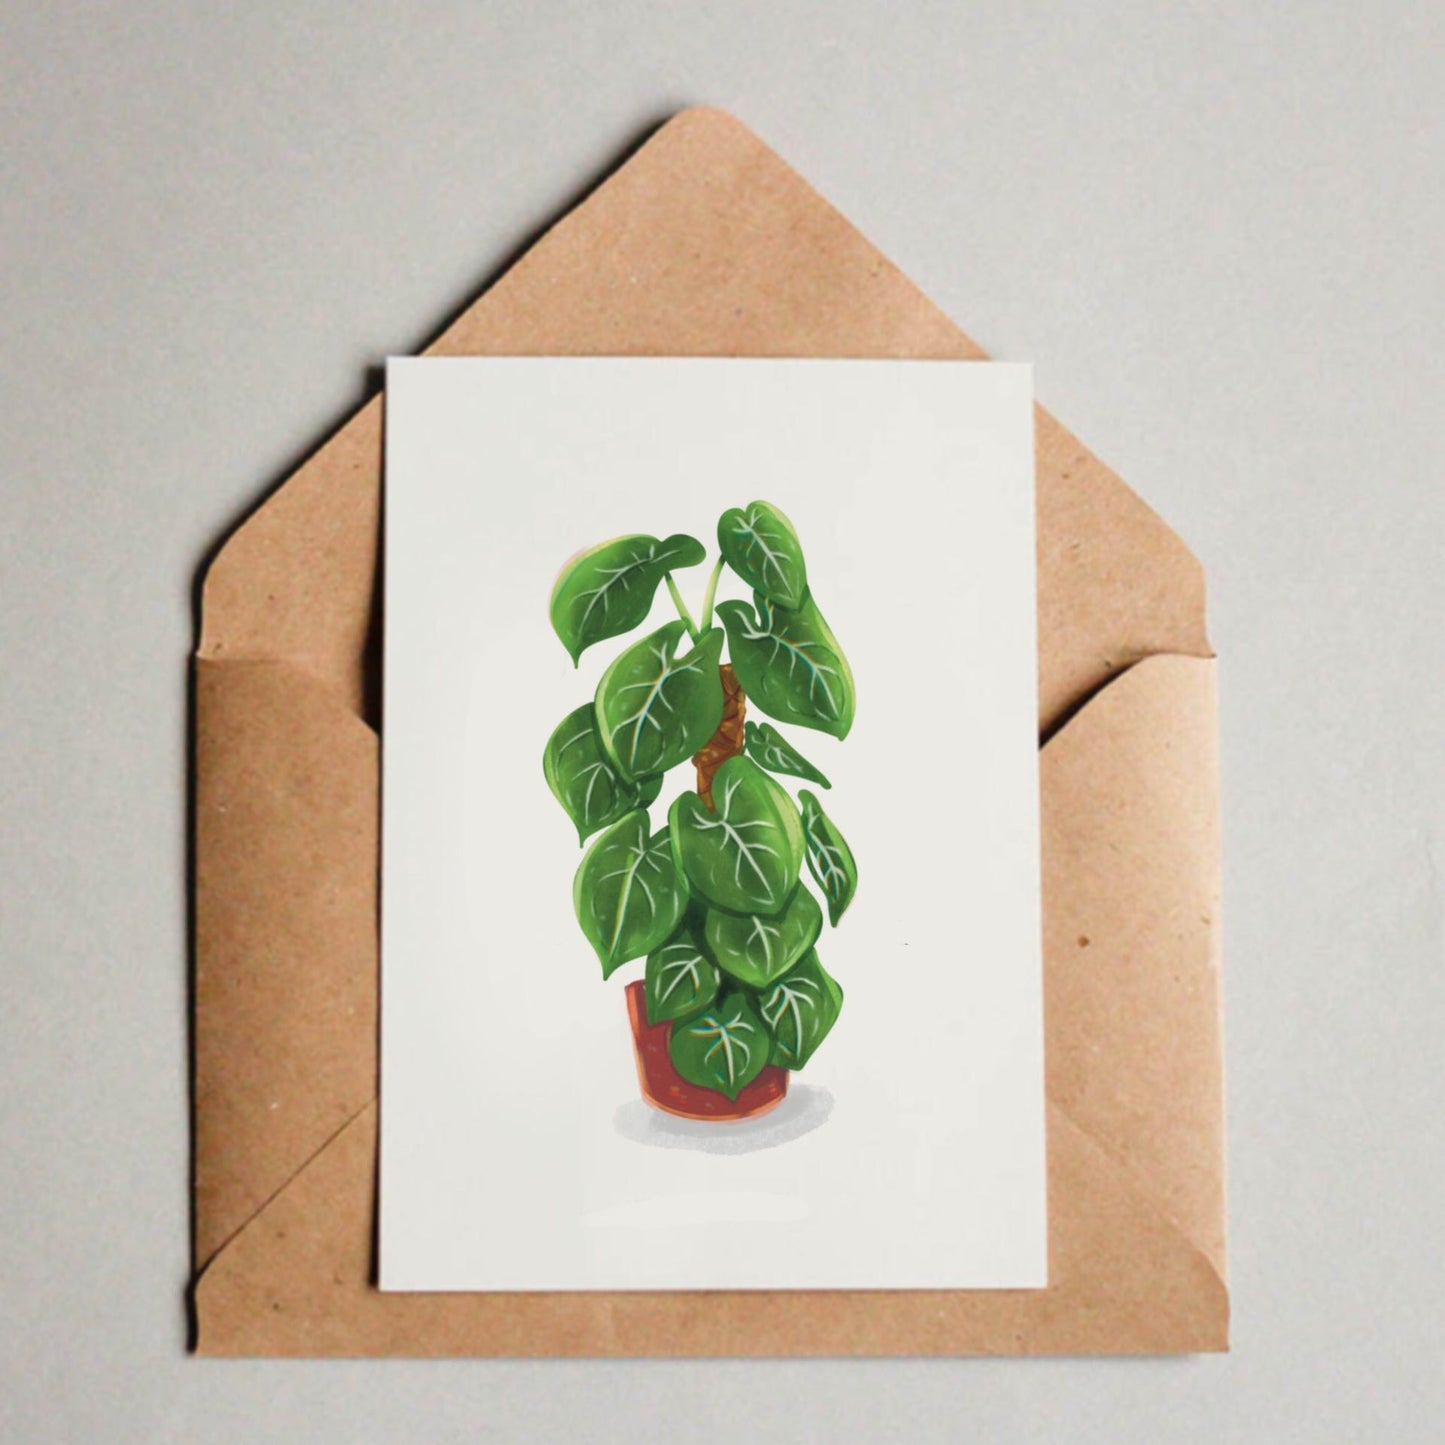 Postkarte / A6 Print - Syngonium Frosted Heart - wearequiethumans